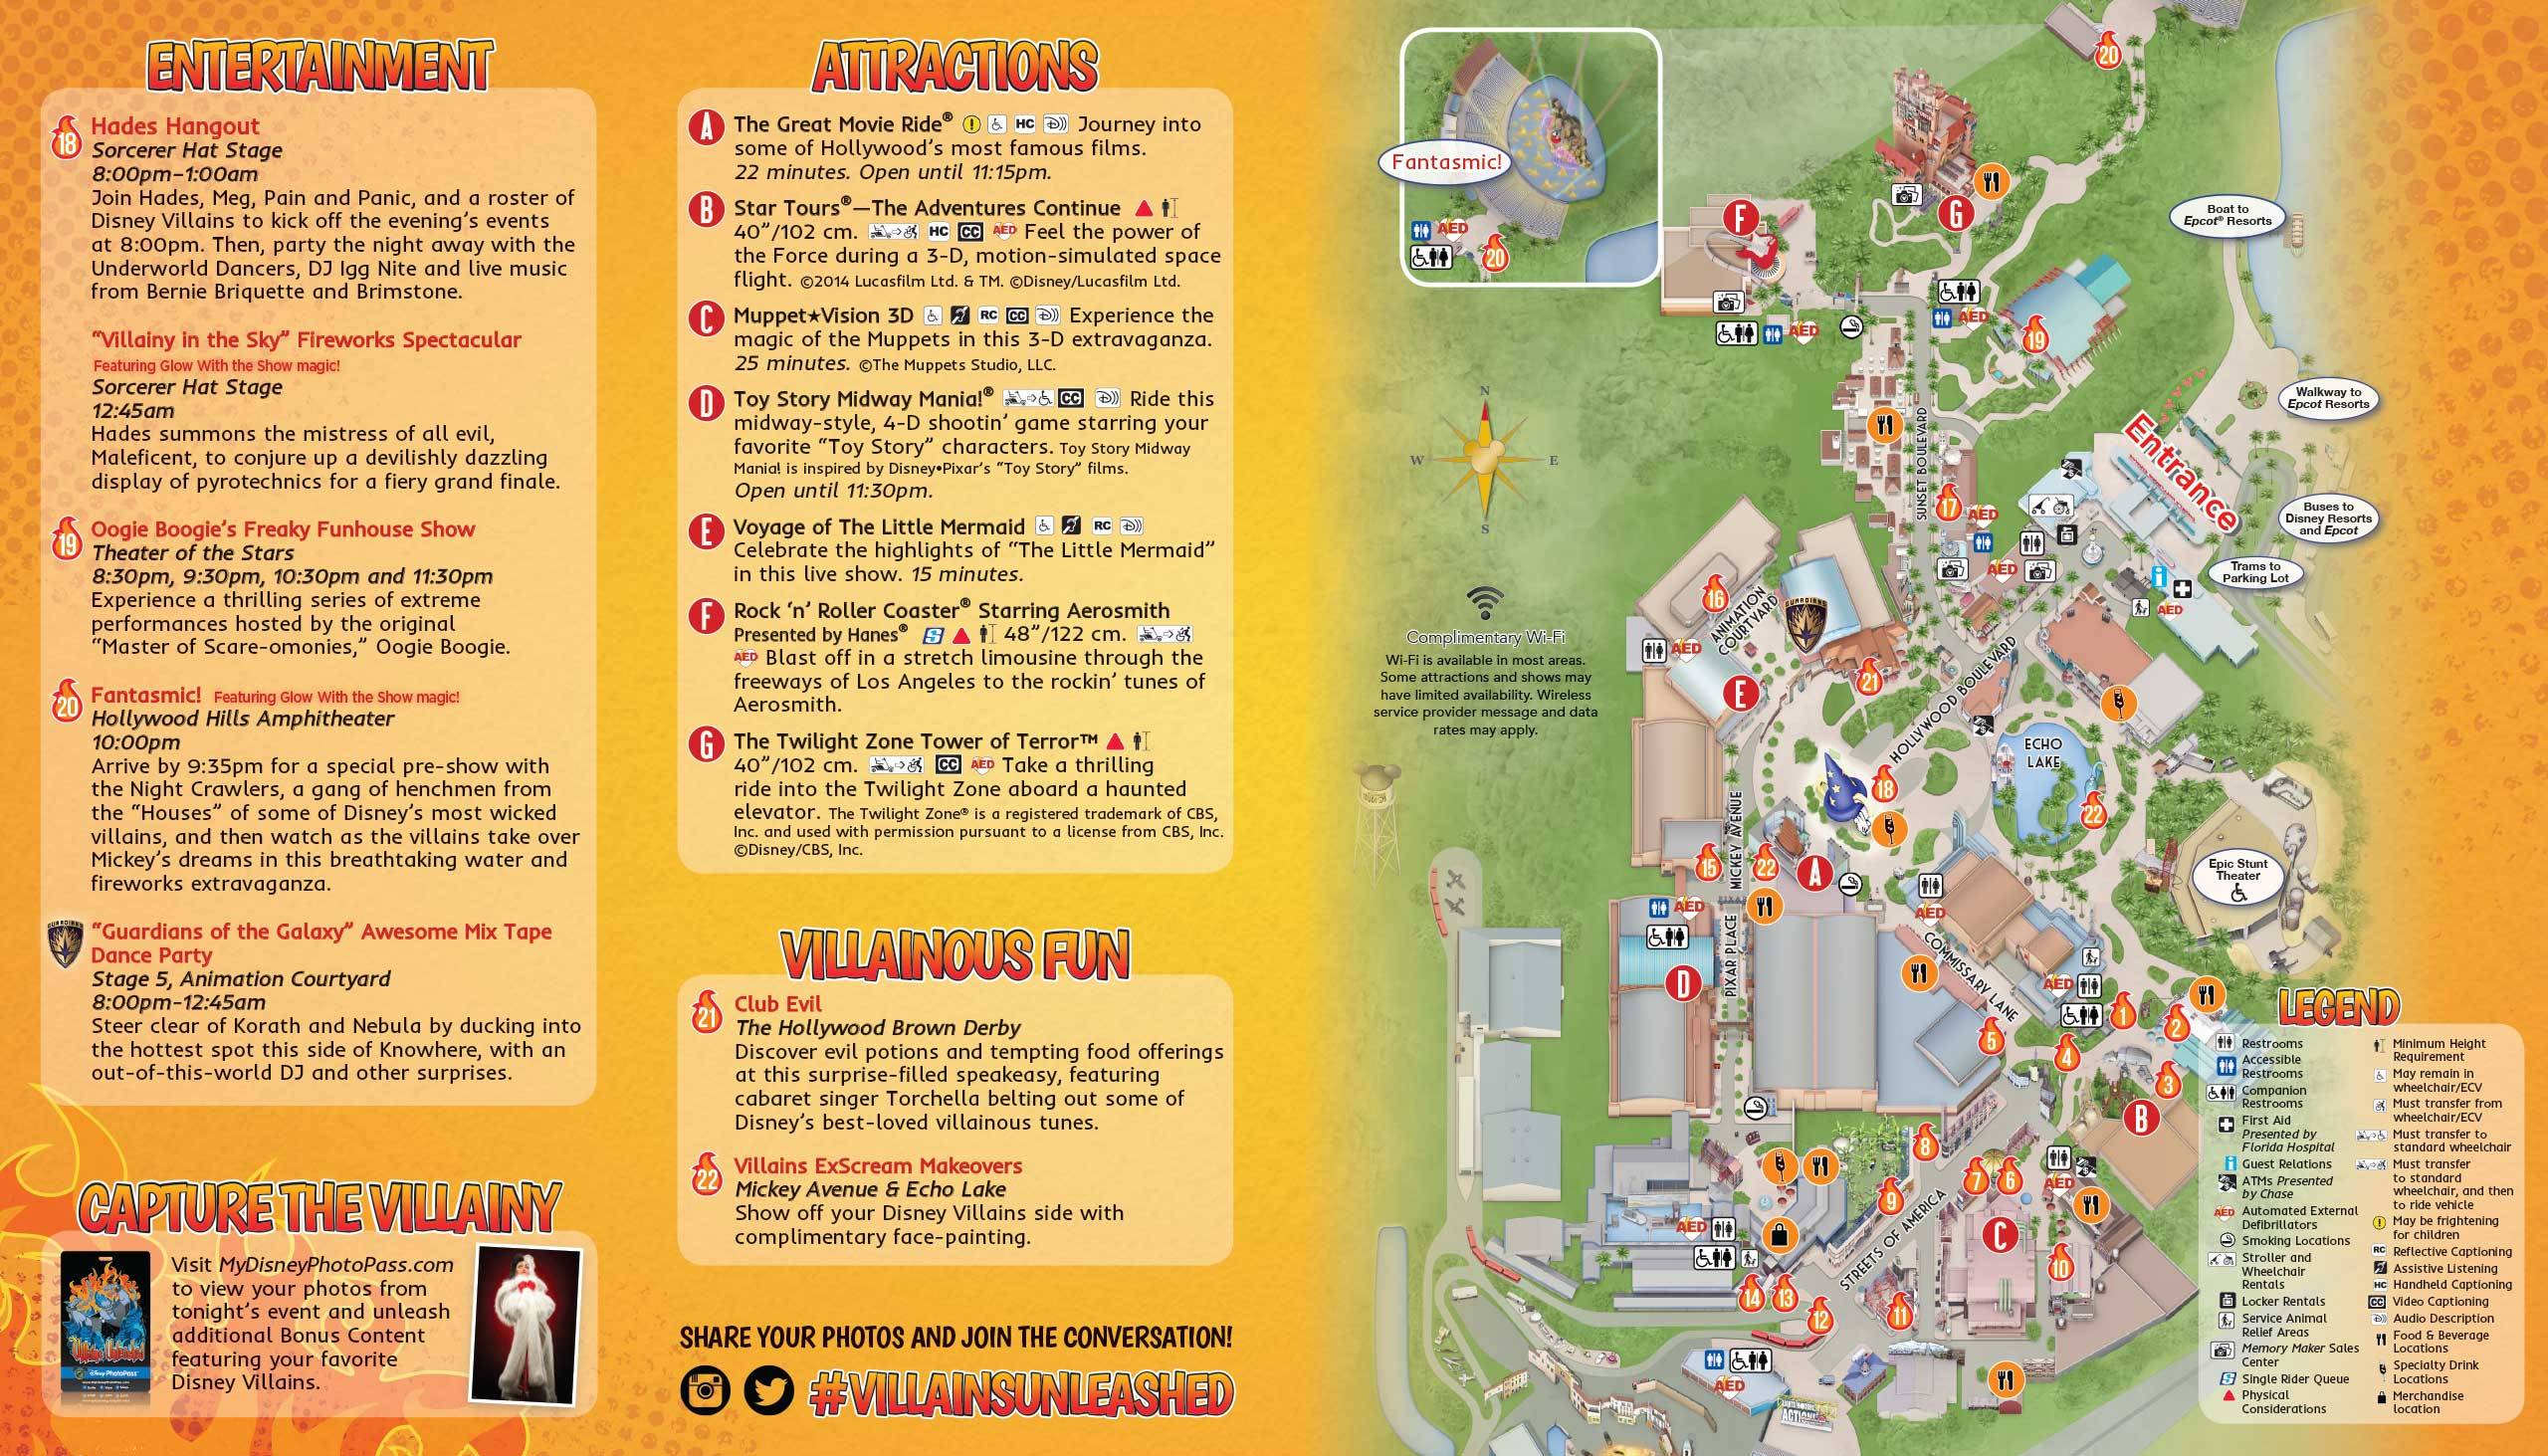 PHOTOS - Villains Unleashed event guide map now available